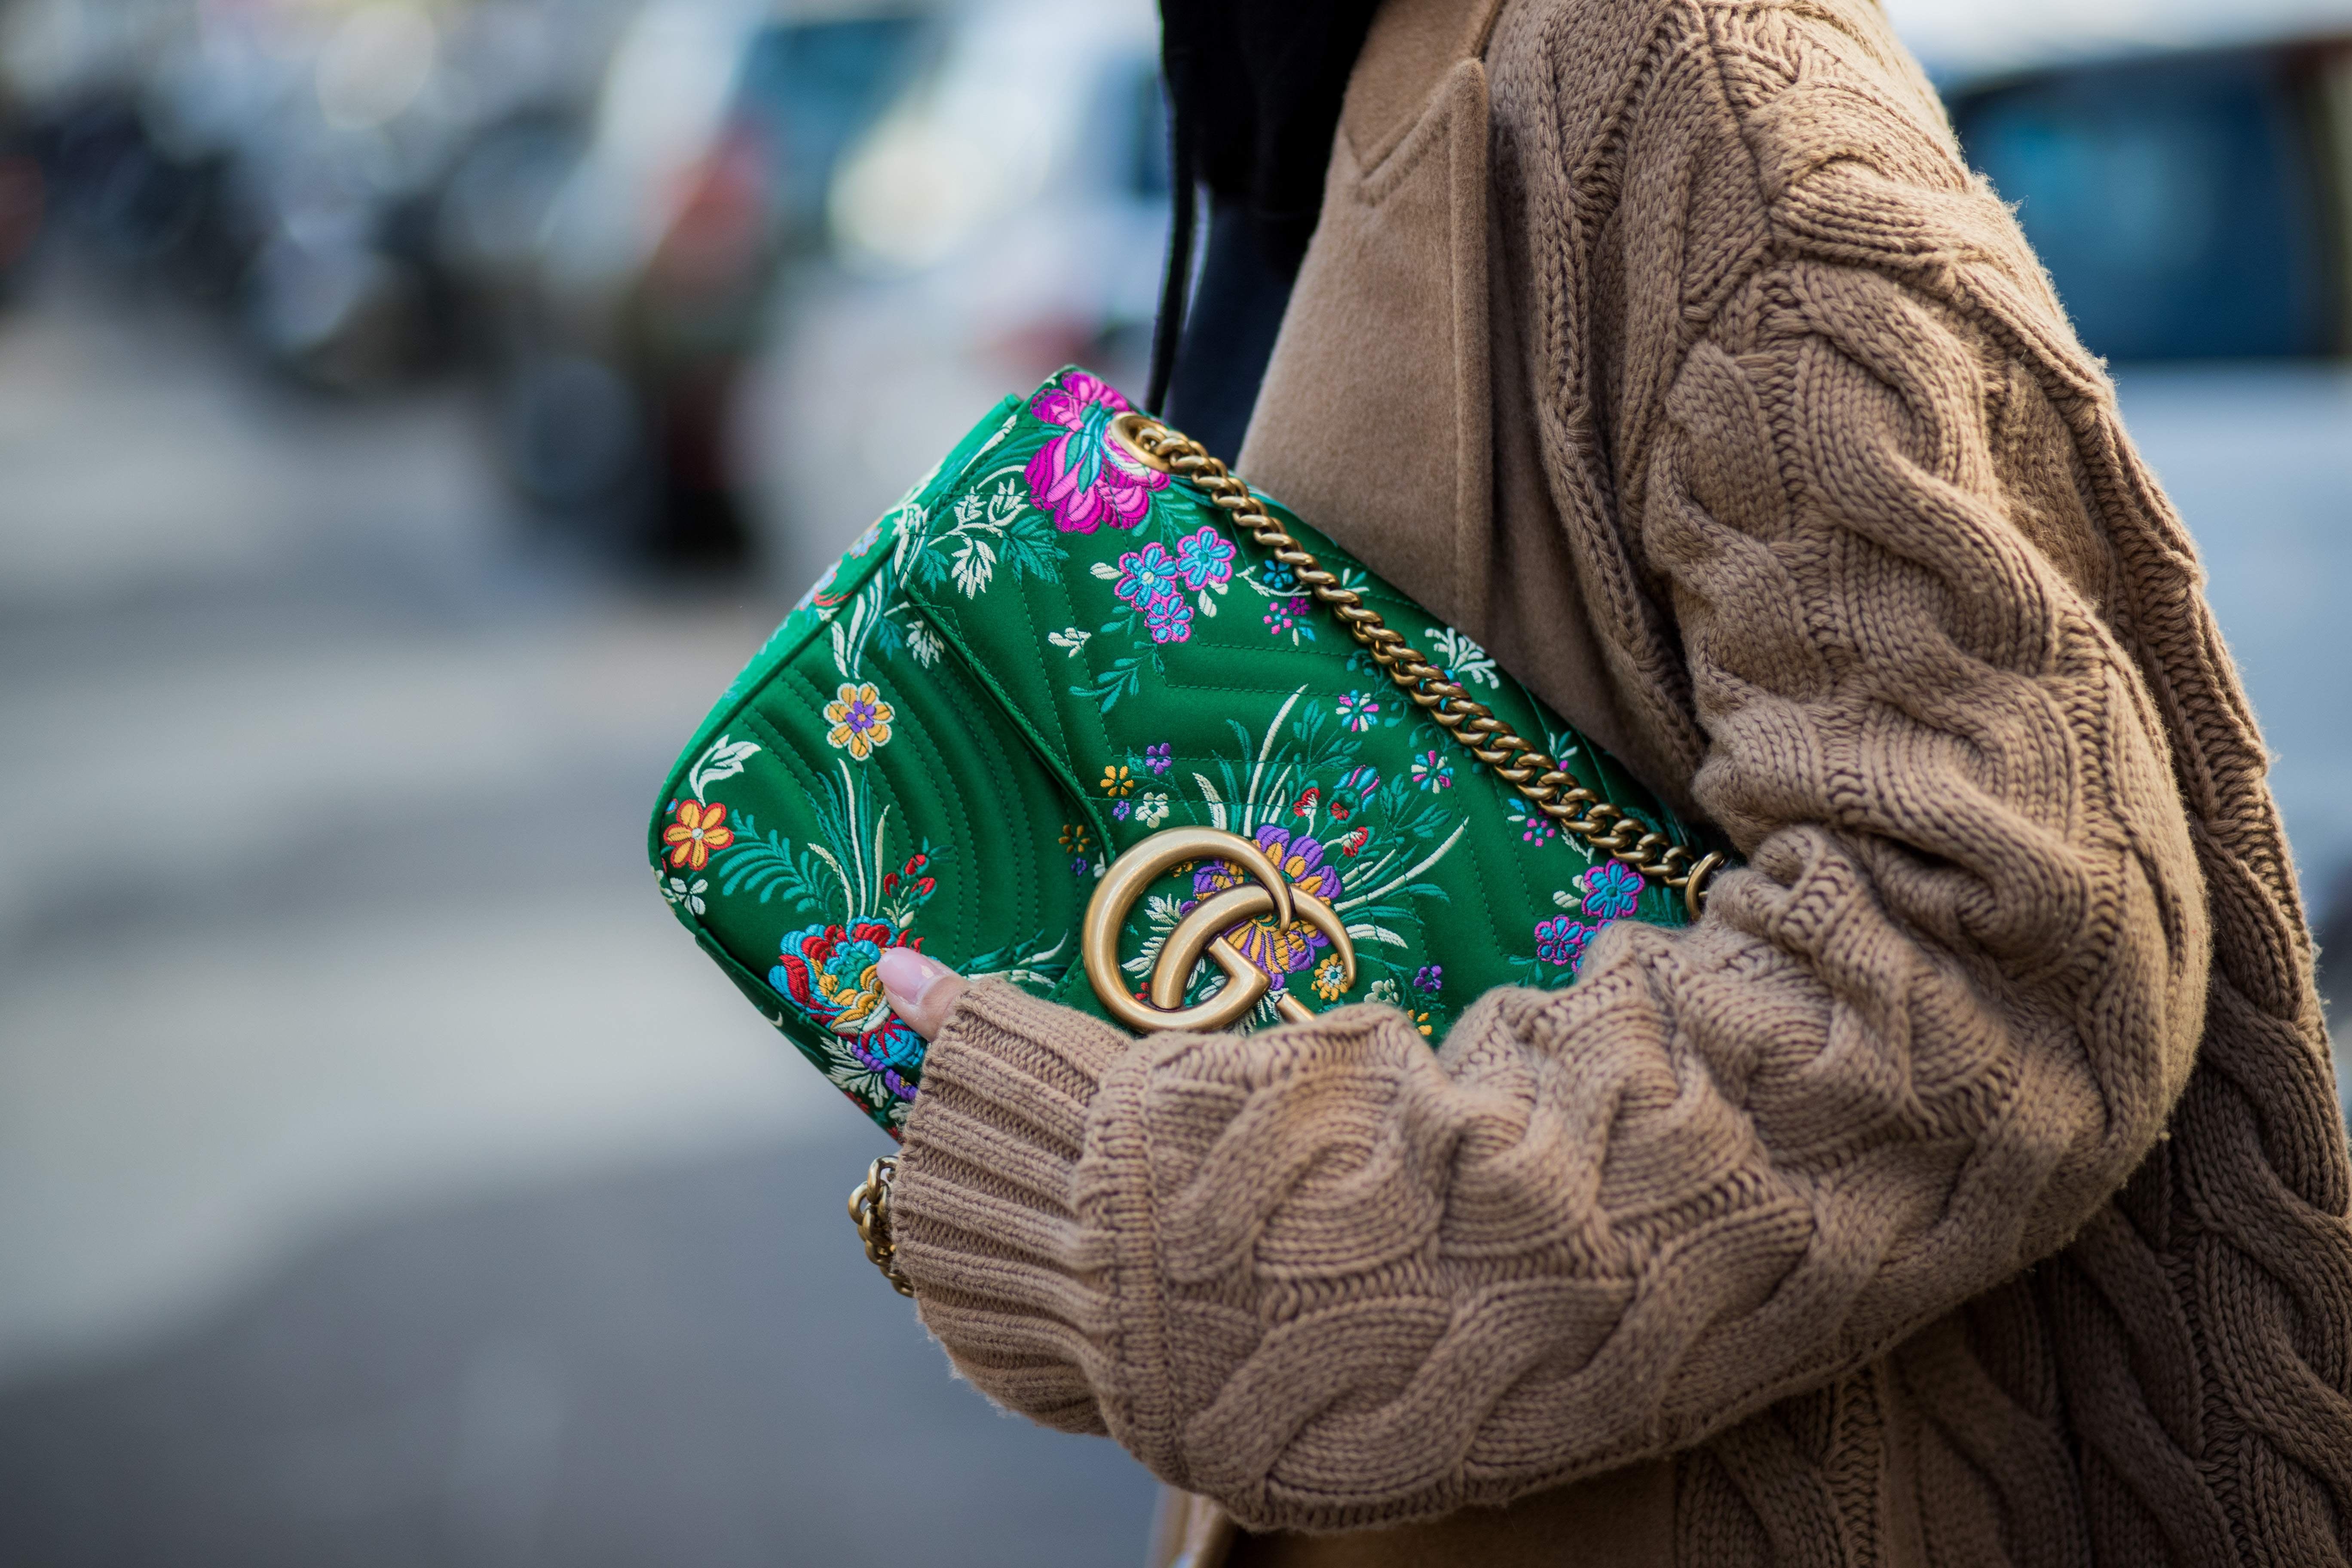 The Gucci bags celebrities can't get enough of